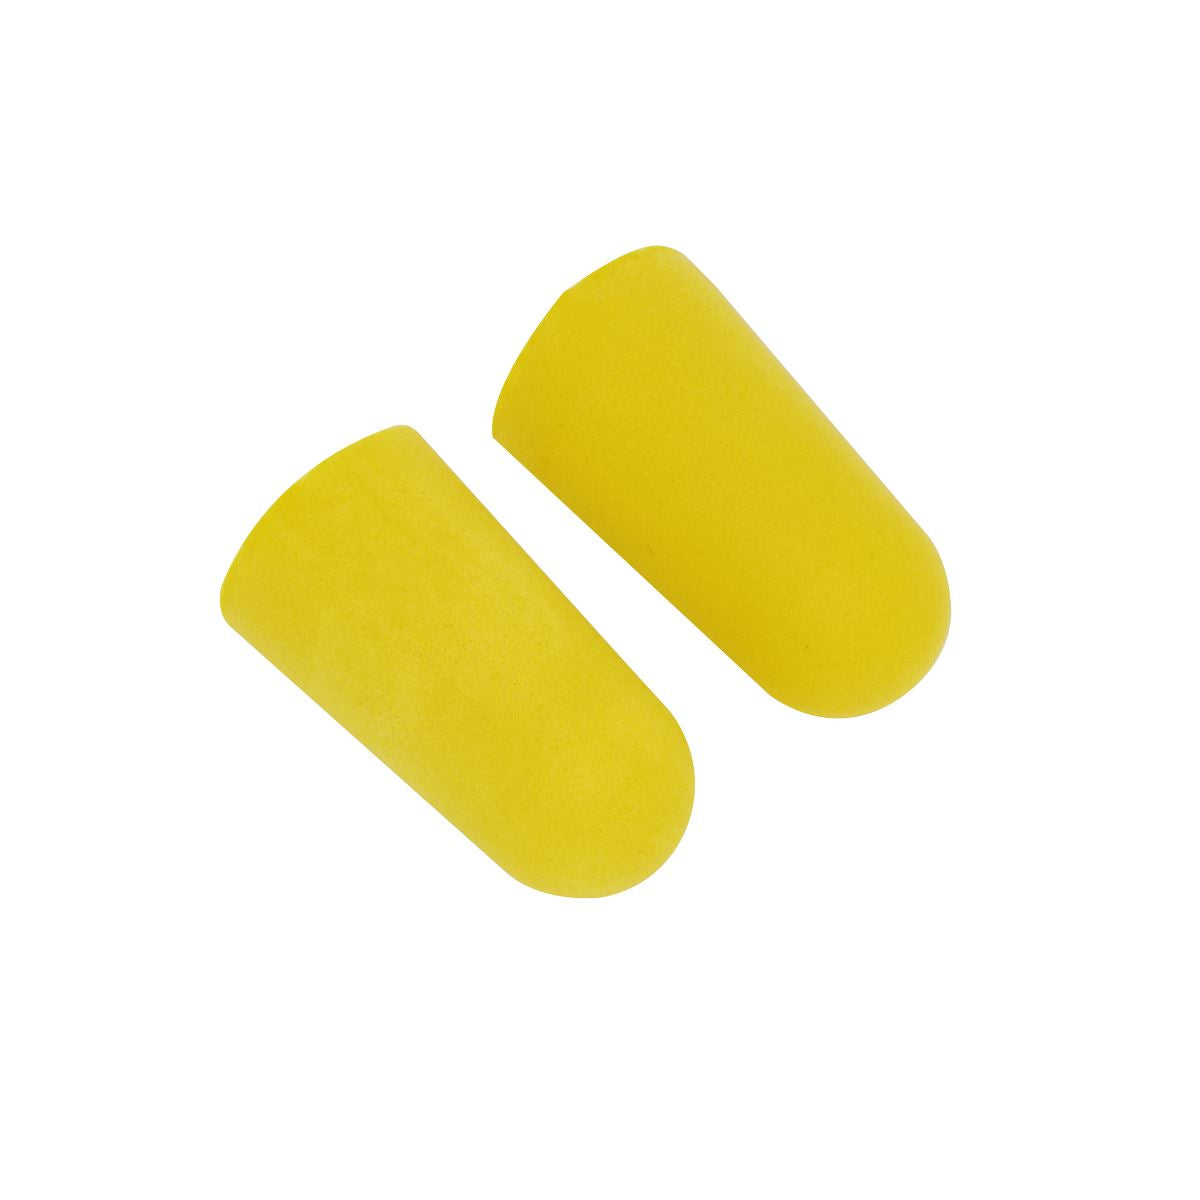 Sealey Ear Plugs Disposable - 200 Pairs 403/200